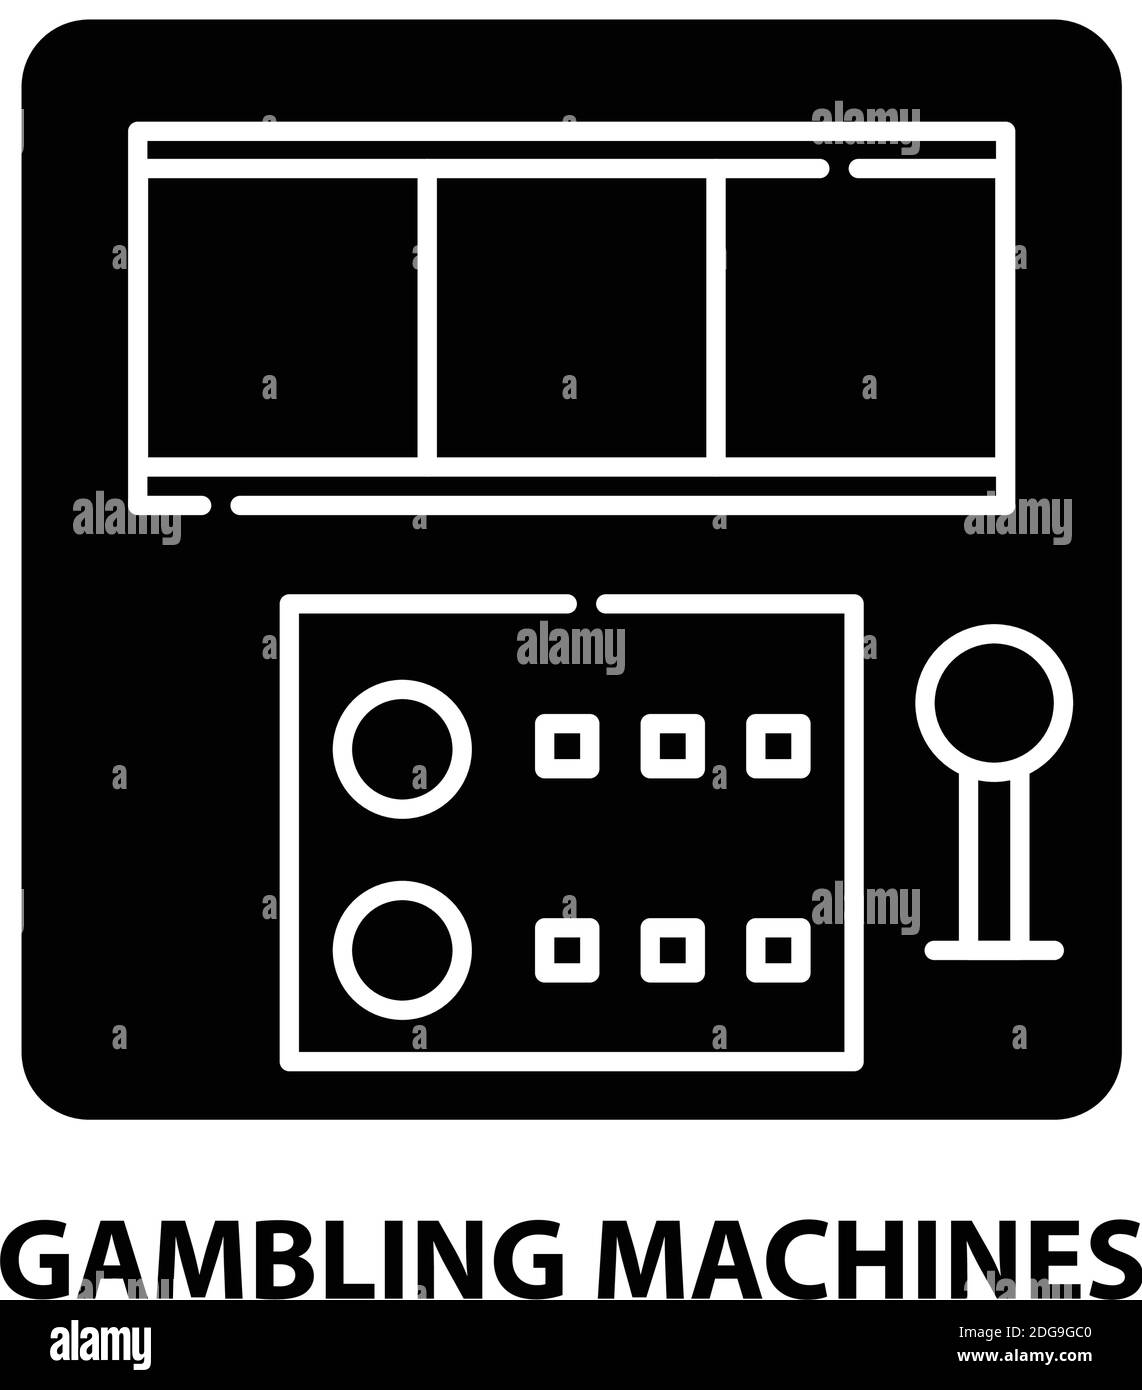 gambling machines icon, black vector sign with editable strokes, concept illustration Stock Vector